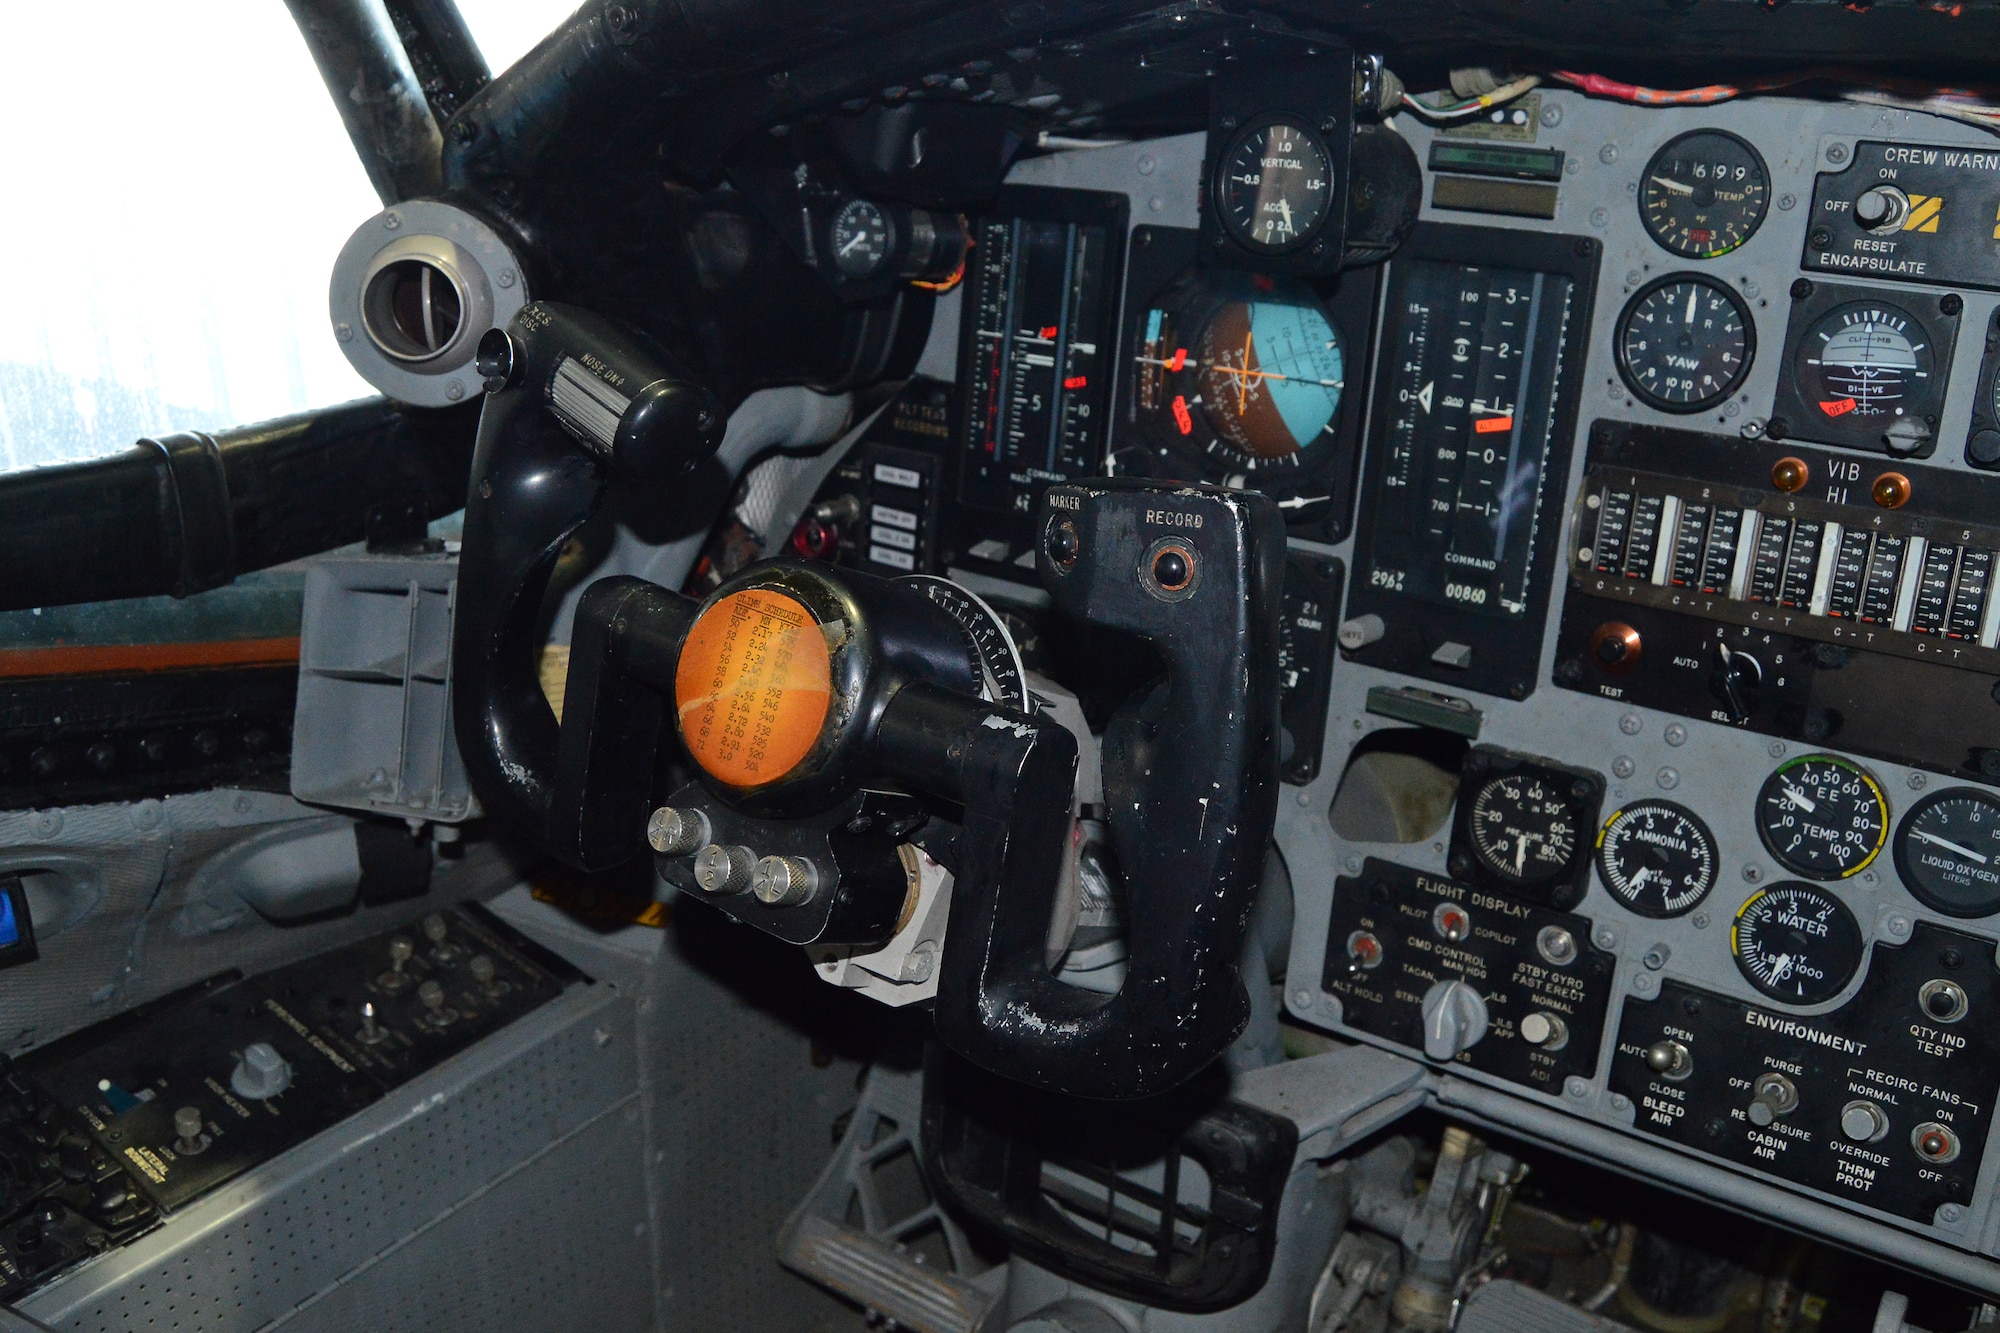 DAYTON, Ohio - North American XB-70 cockpit at the National Museum of the U.S. Air Force. (U.S. Air Force photo by Ken LaRock)